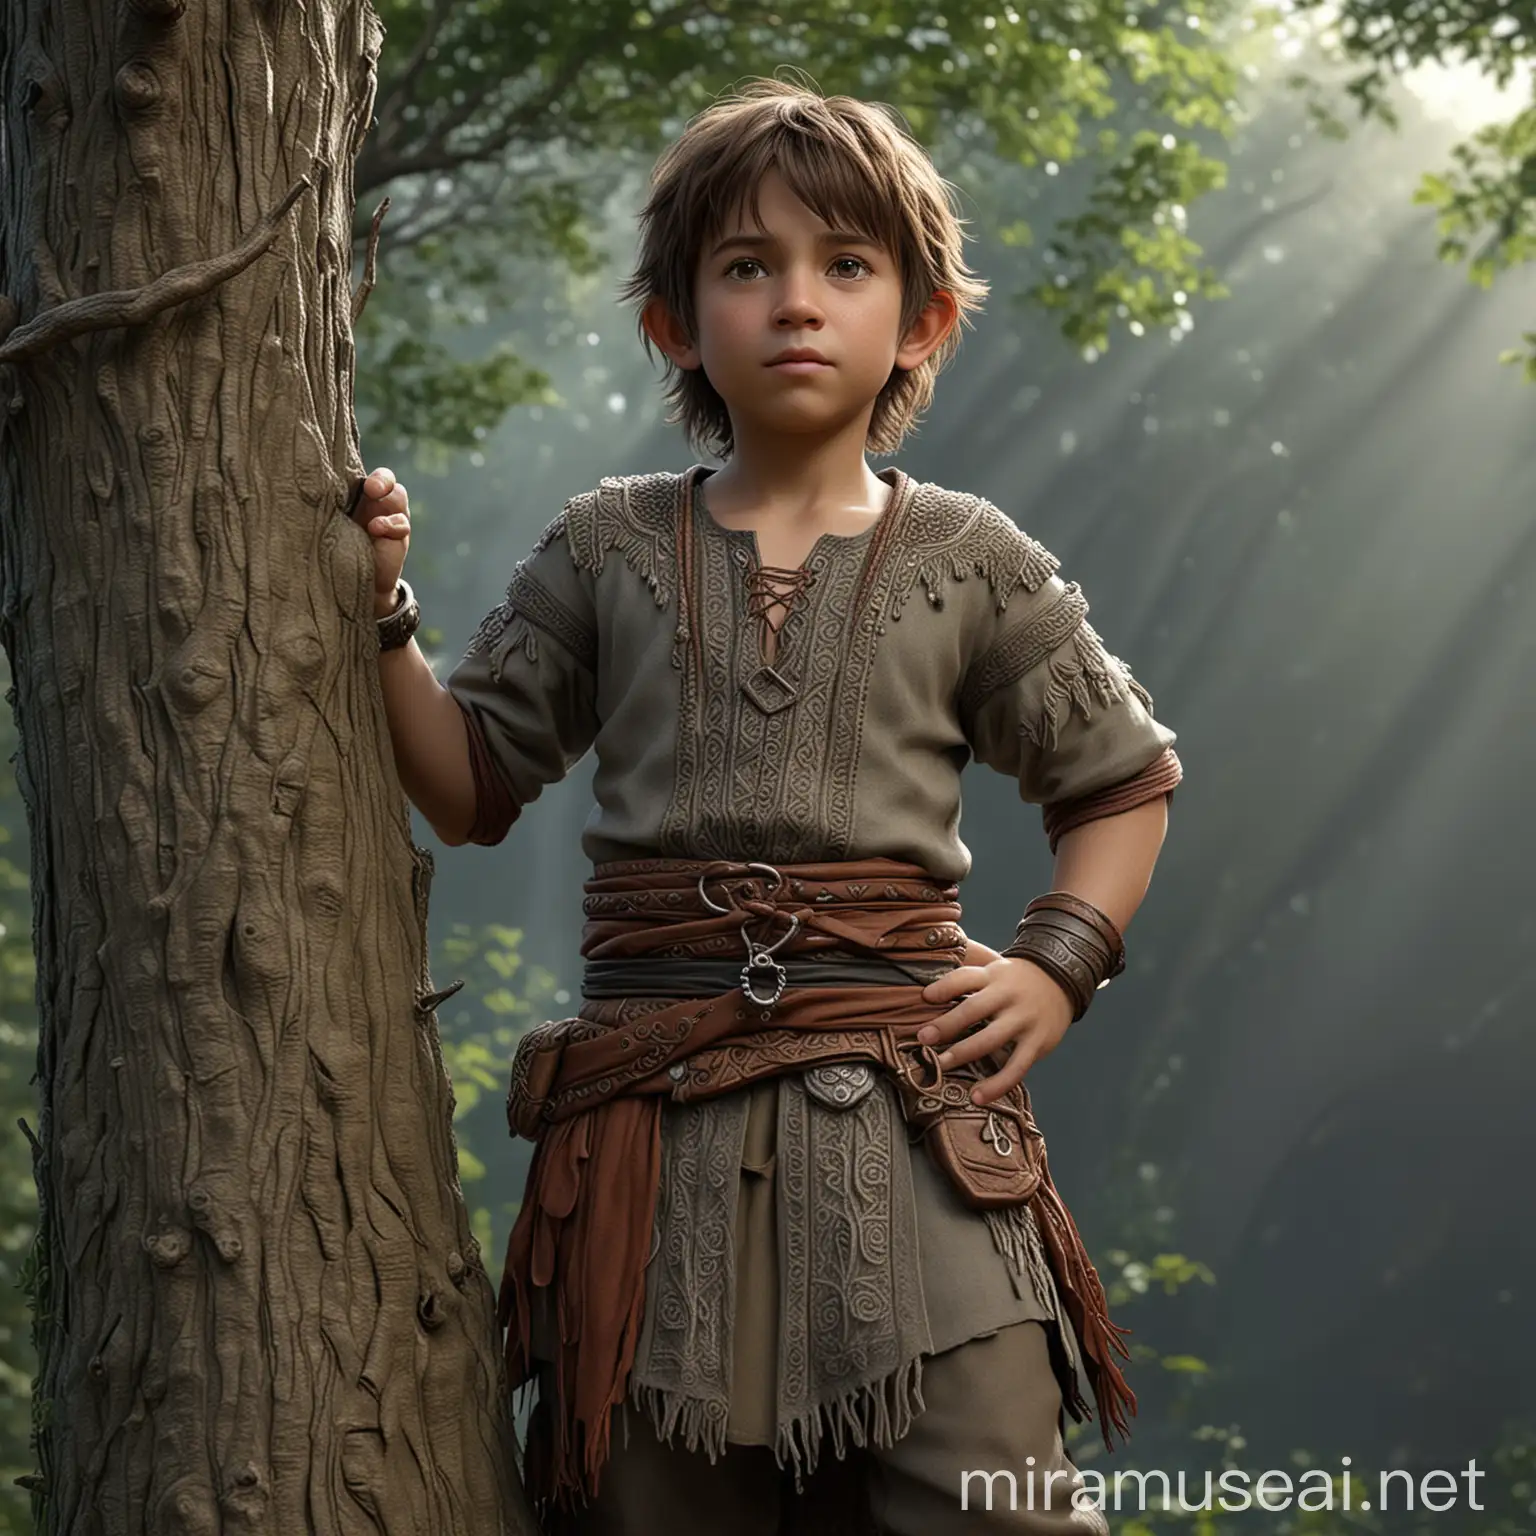 Halfling in Tribal Attire Stands Among Trees with Intense Gaze